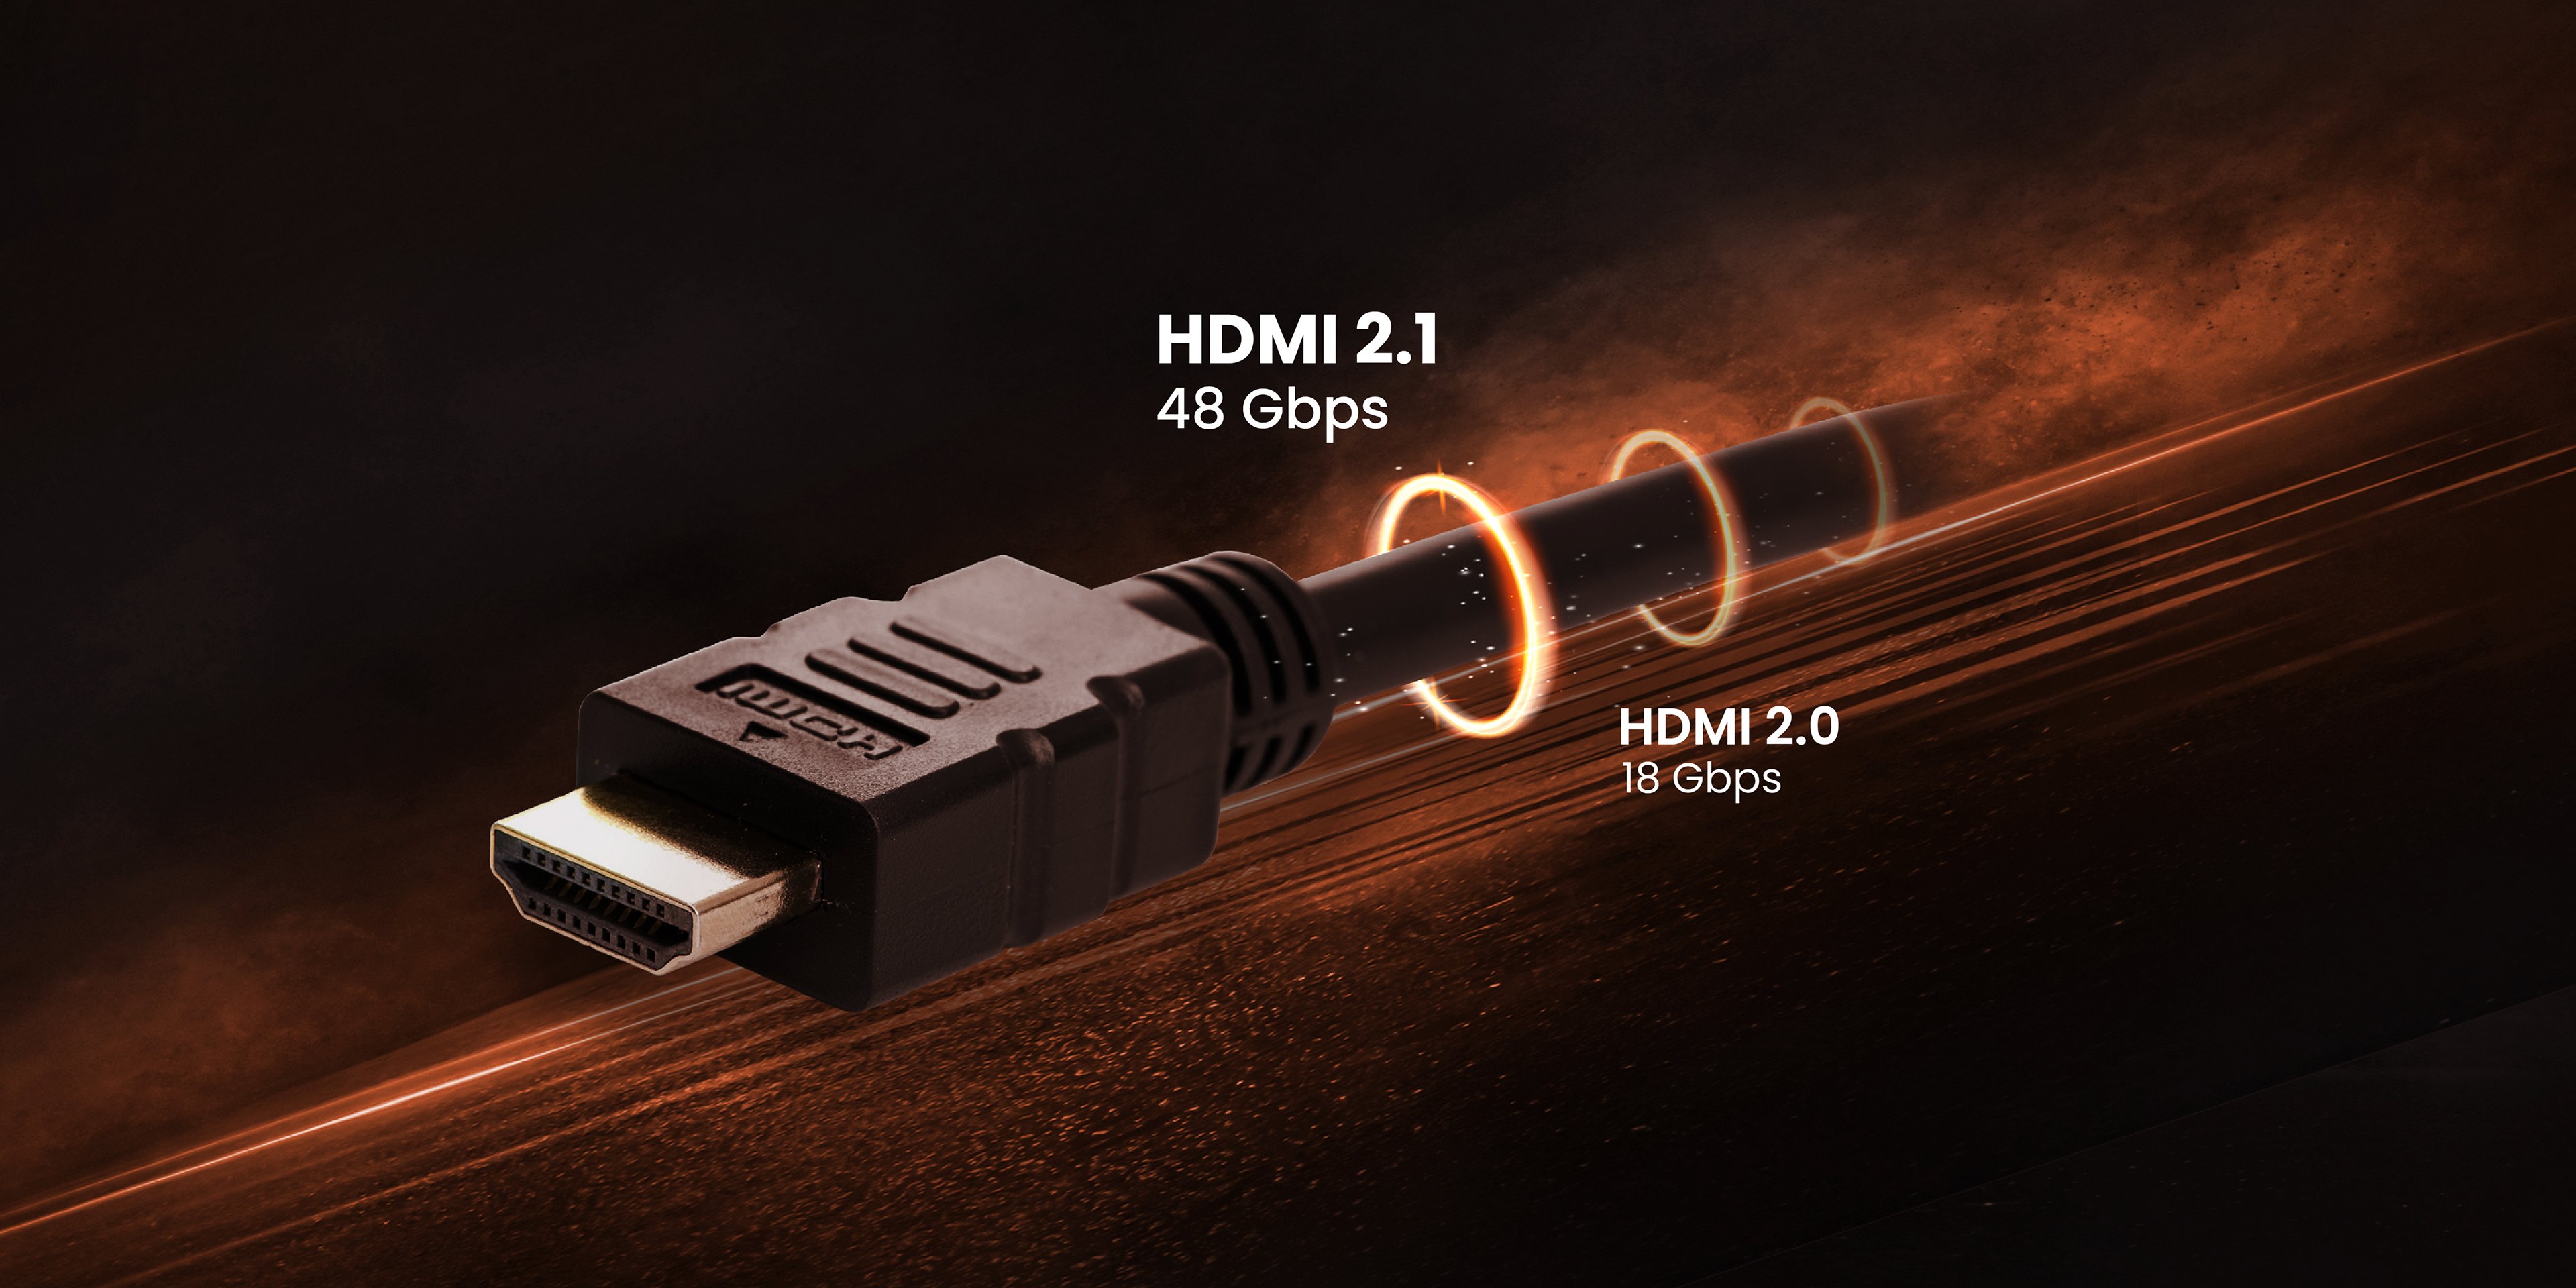 Tilbageholdenhed Downtown Resistente When Do I Really Need HDMI 2.1 or Is HDMI 2.0 Enough? | BenQ US